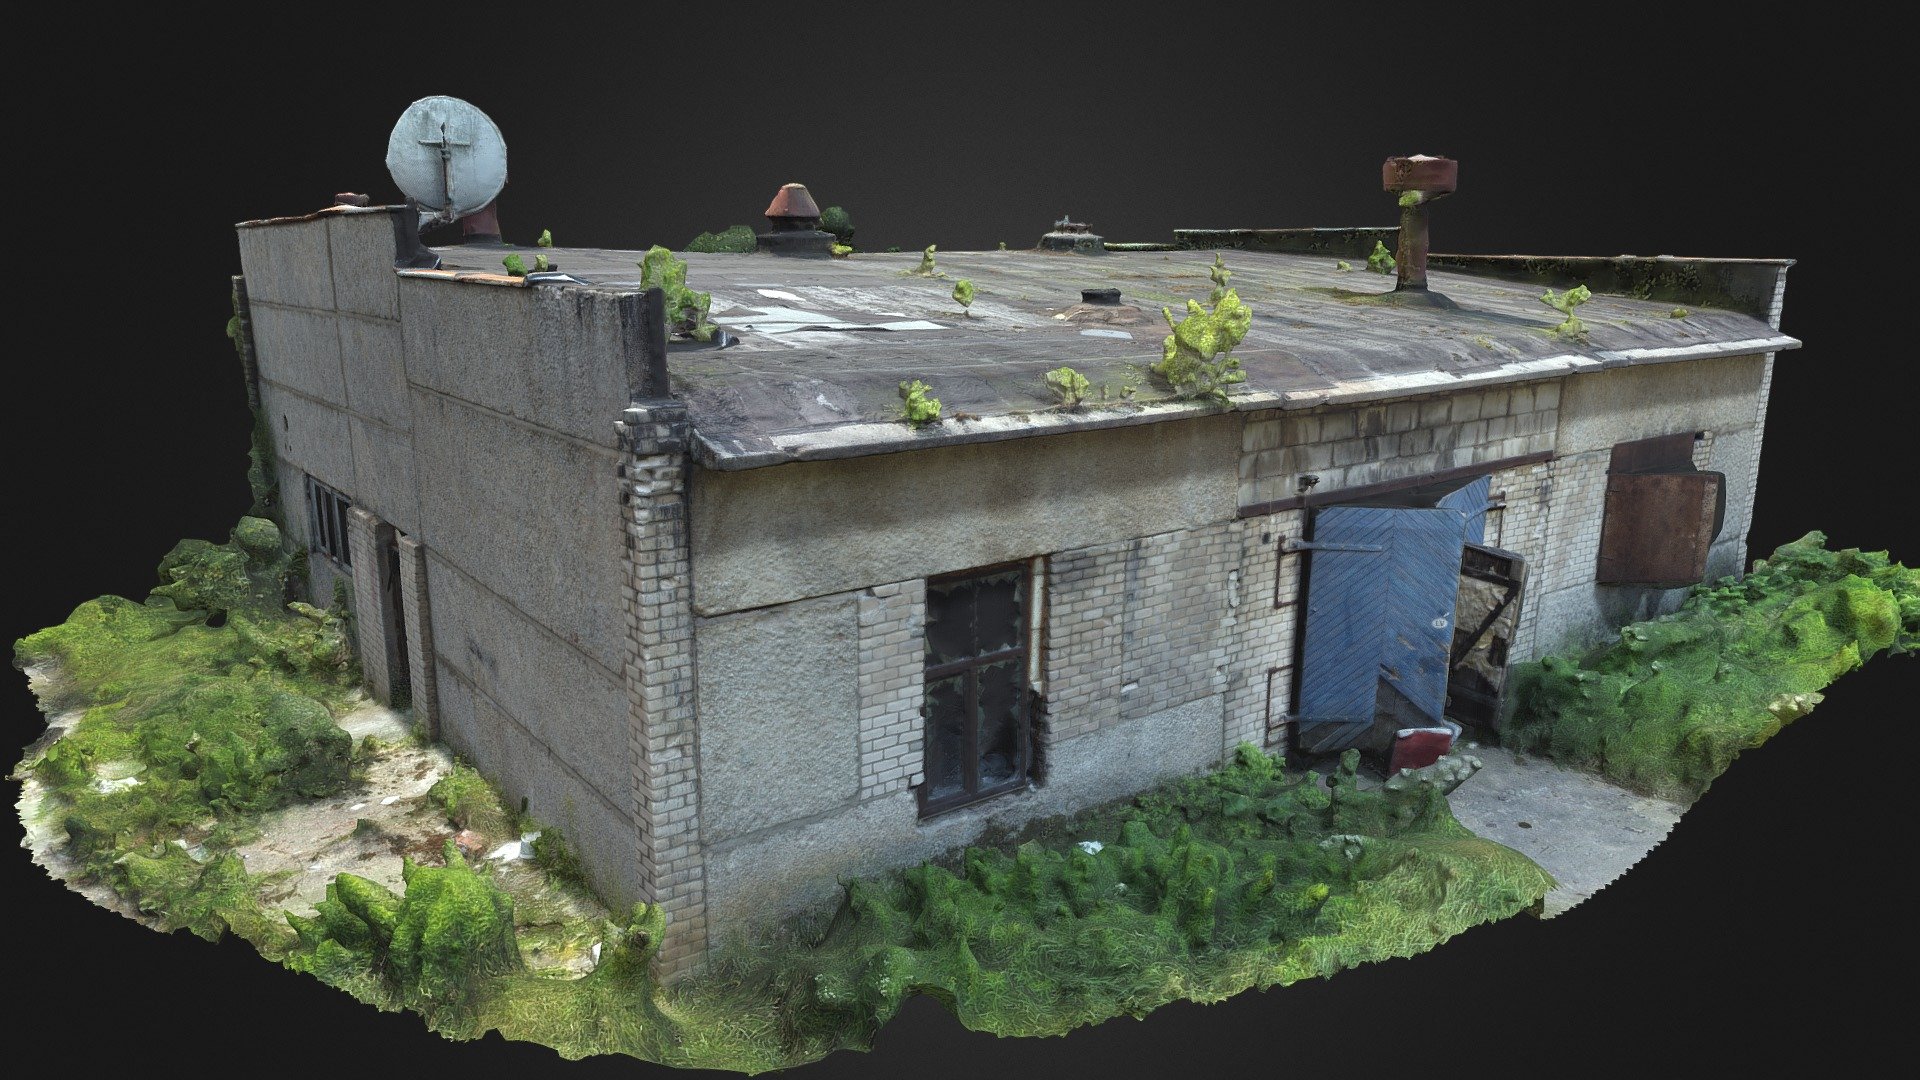 3D scan of an old brick soviet industrial building with blue wooden door, old bricks, grass.
With normal map 3d model